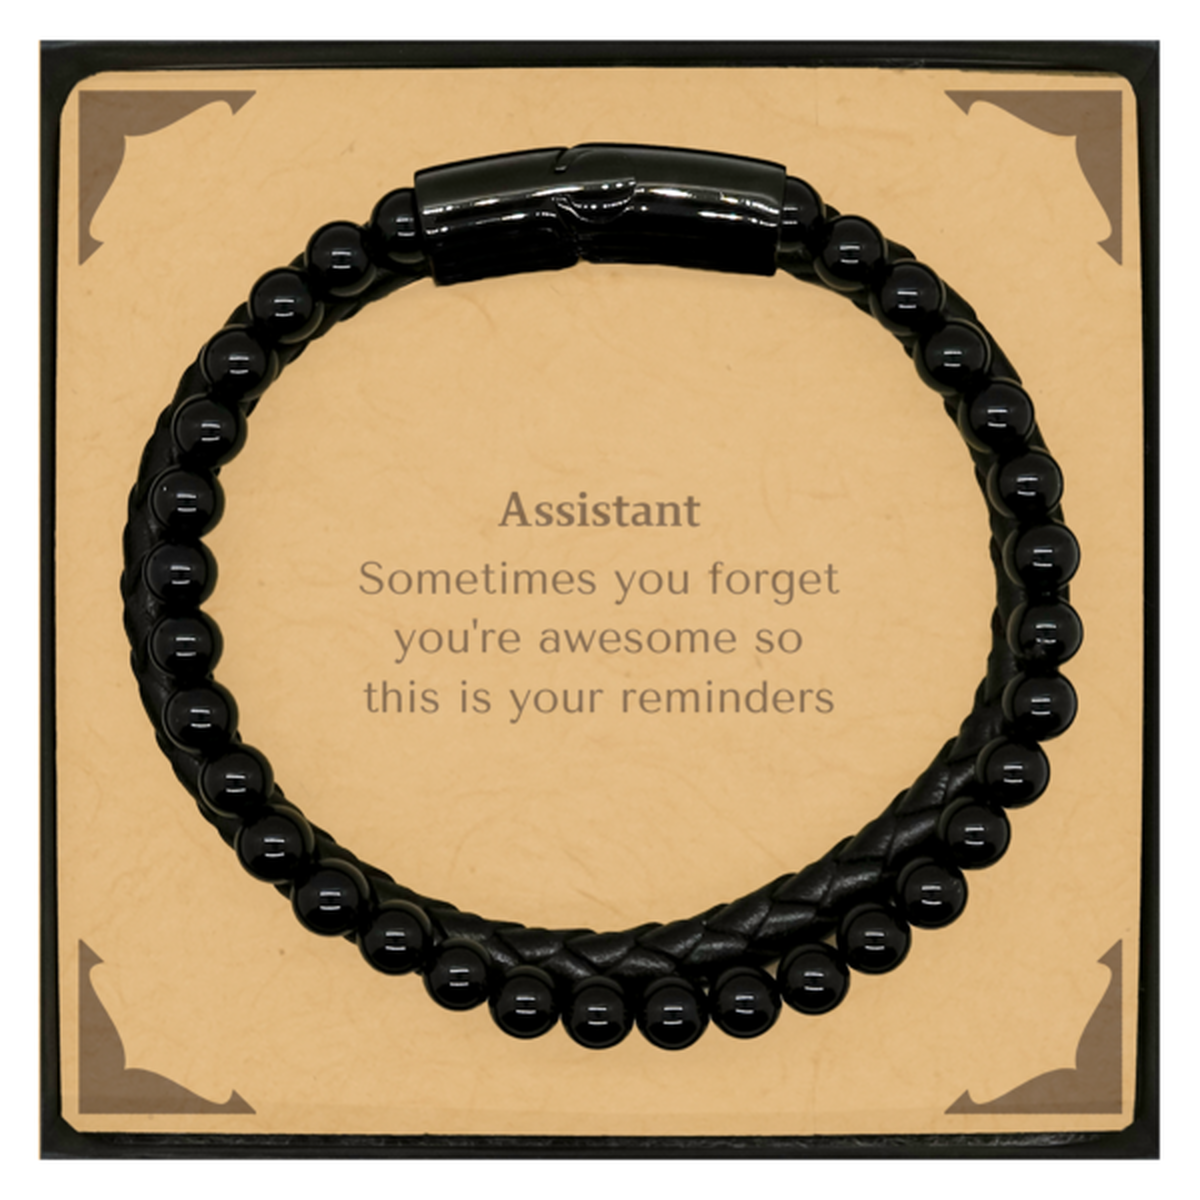 Sentimental Assistant Stone Leather Bracelets, Assistant Sometimes you forget you're awesome so this is your reminders, Graduation Christmas Birthday Gifts for Assistant, Men, Women, Coworkers